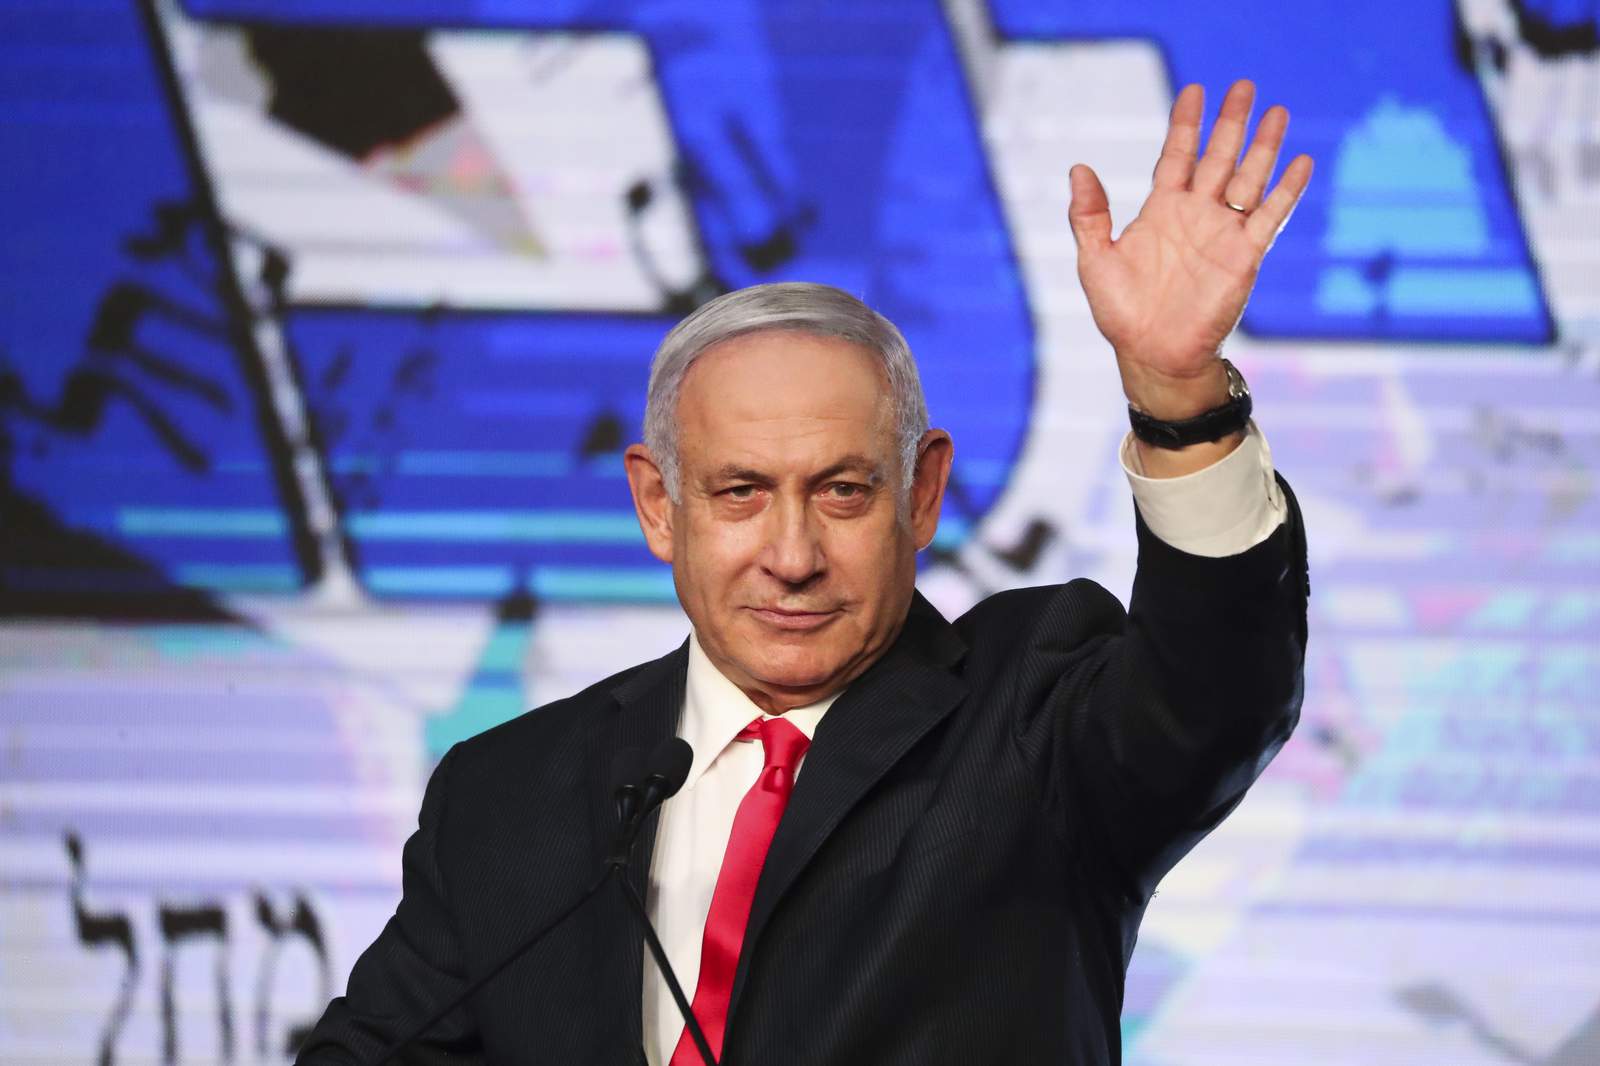 Israel appears mired in deadlock as votes are tallied